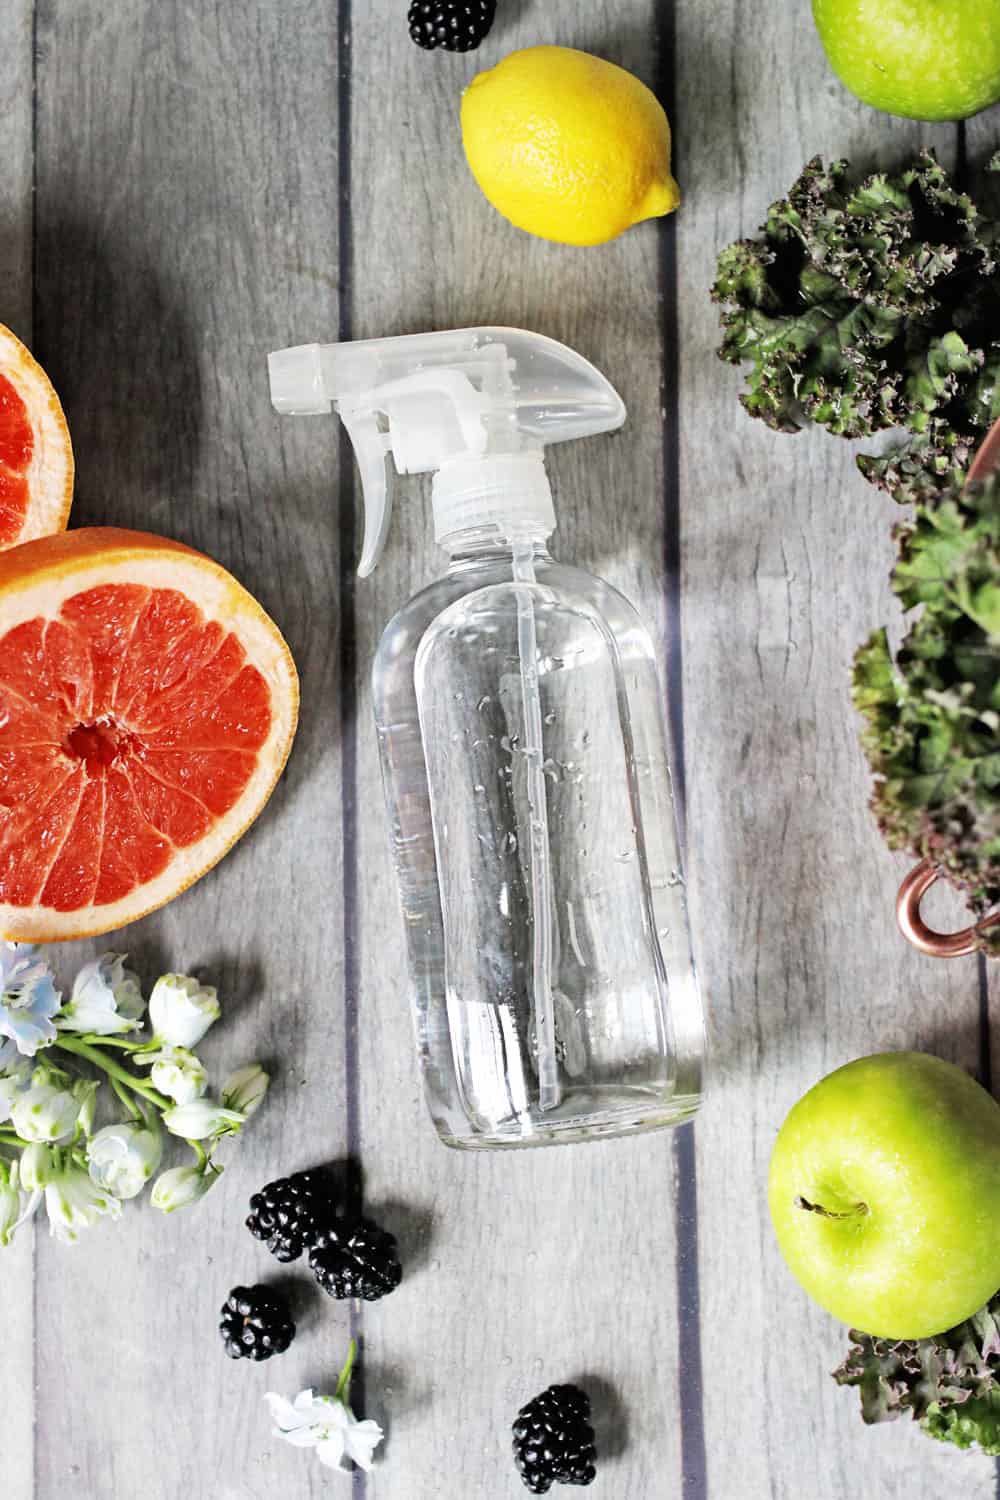 A Simple 4-Ingredient Produce Wash You Can Make at Home